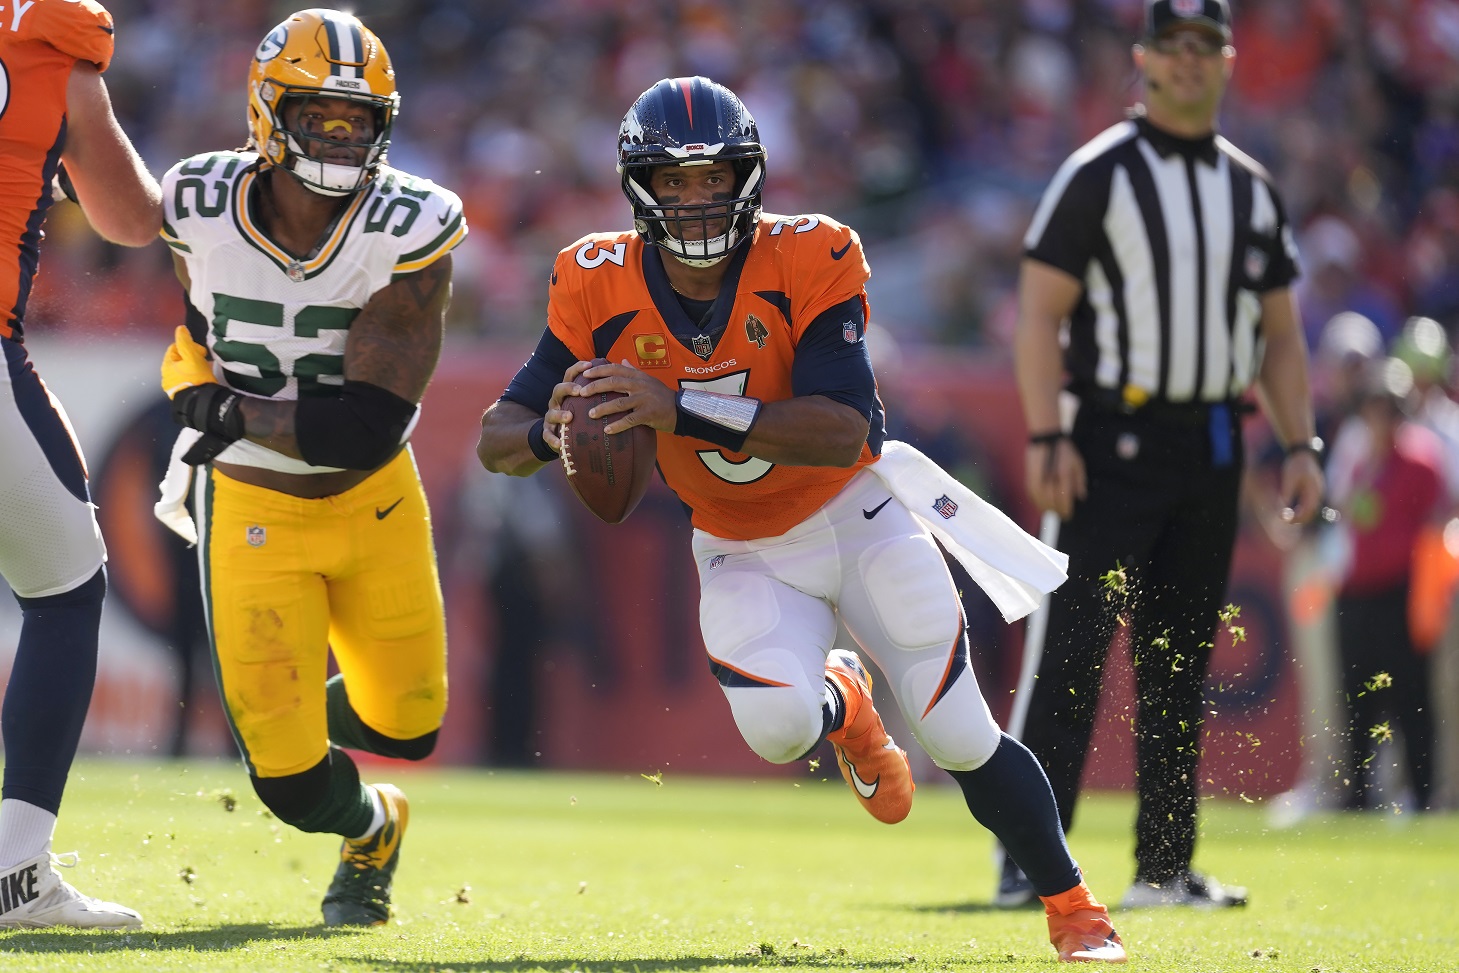 P.J. Locke saves Denver from another second-half meltdown as Broncos beat Packers 19-17